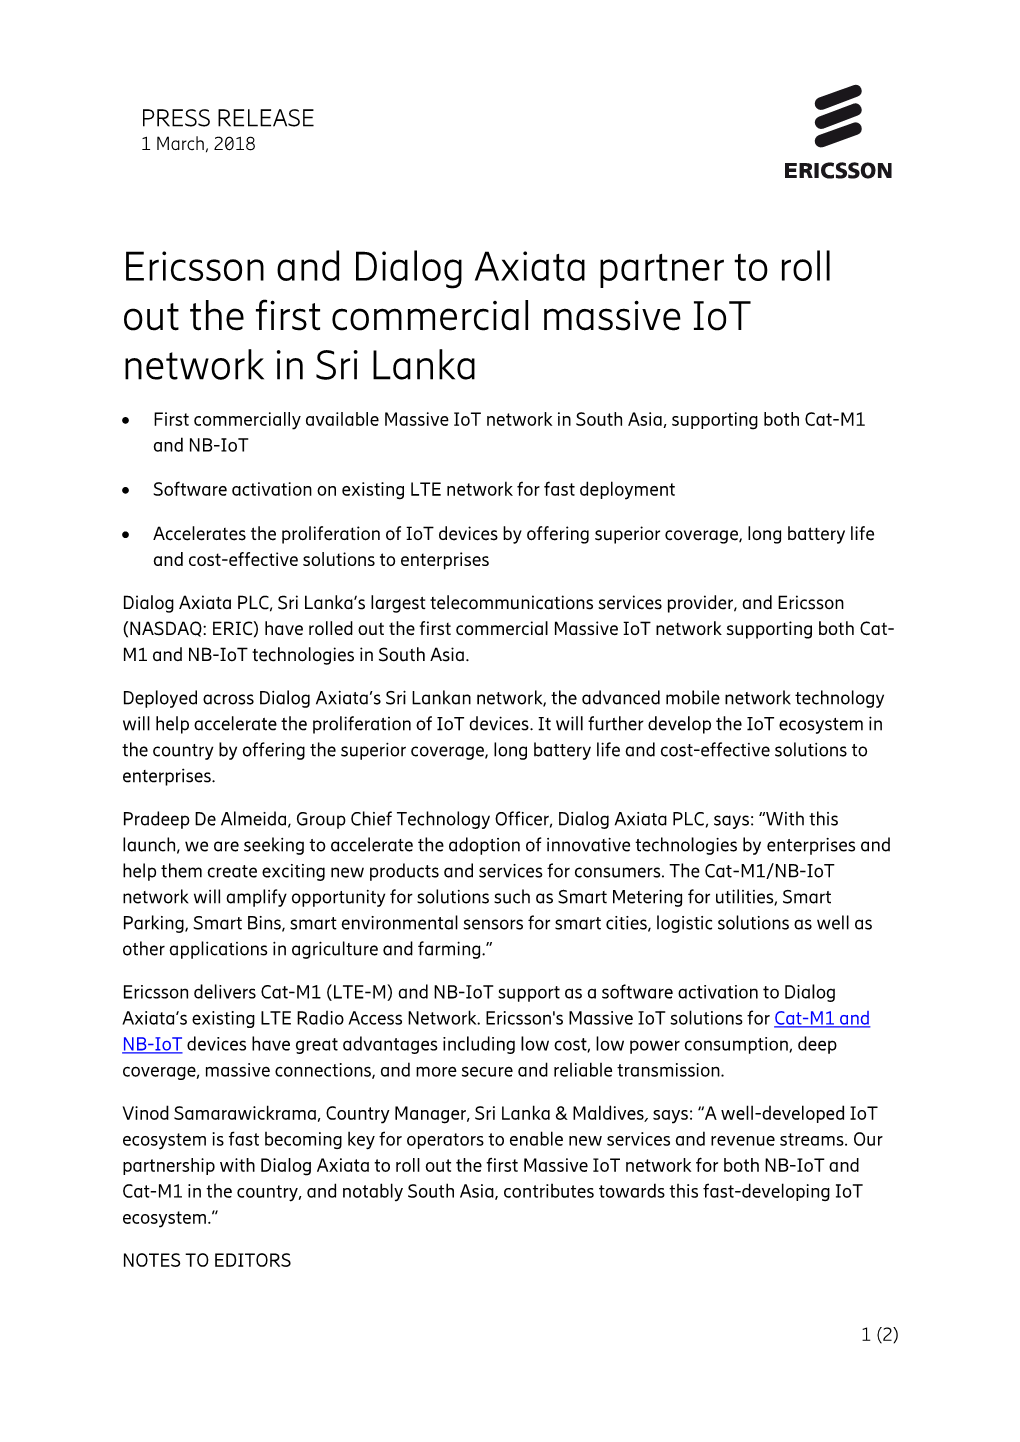 Ericsson and Dialog Axiata Partner to Roll out the First Commercial Massive Iot Network in Sri Lanka